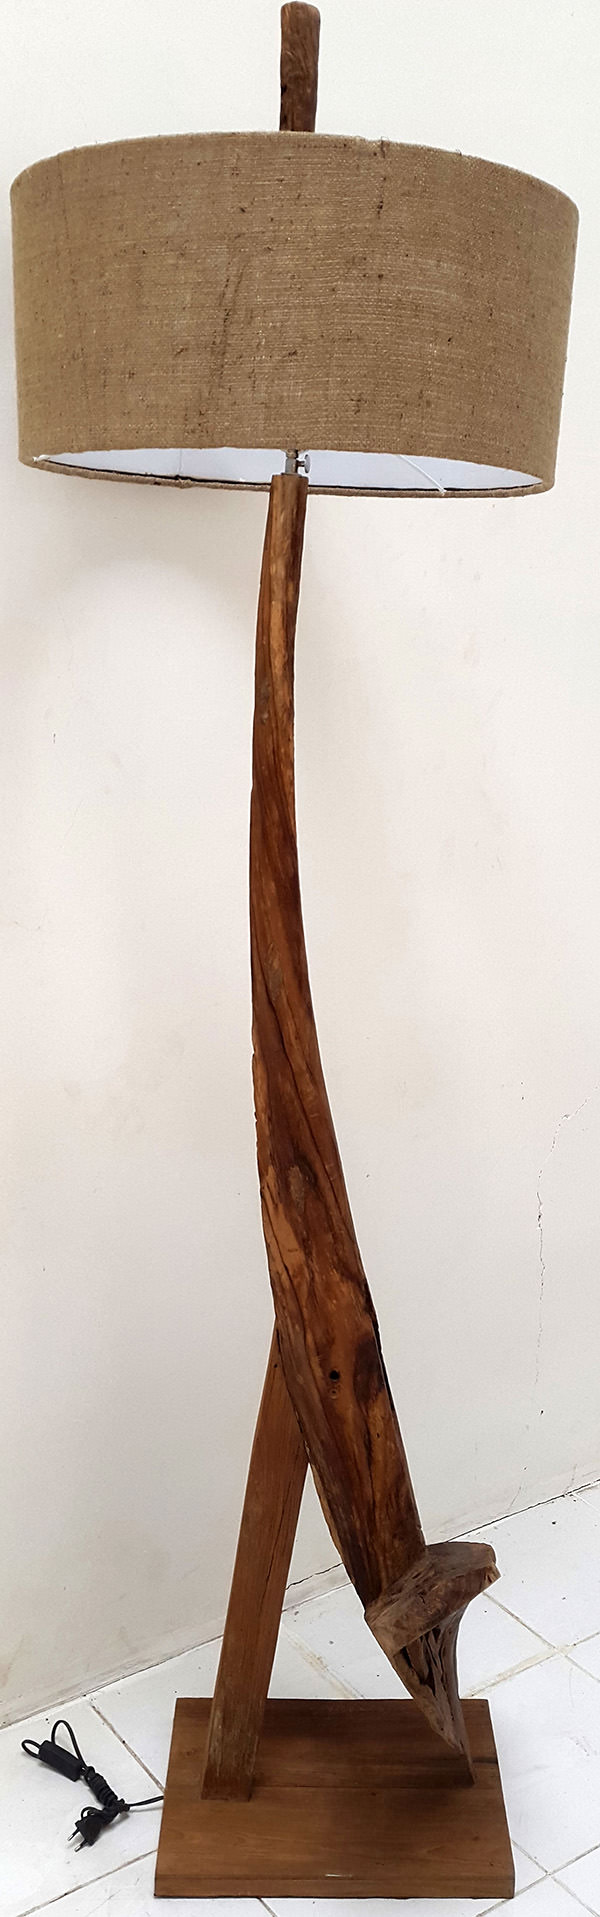 teak standing lamp with natural shape